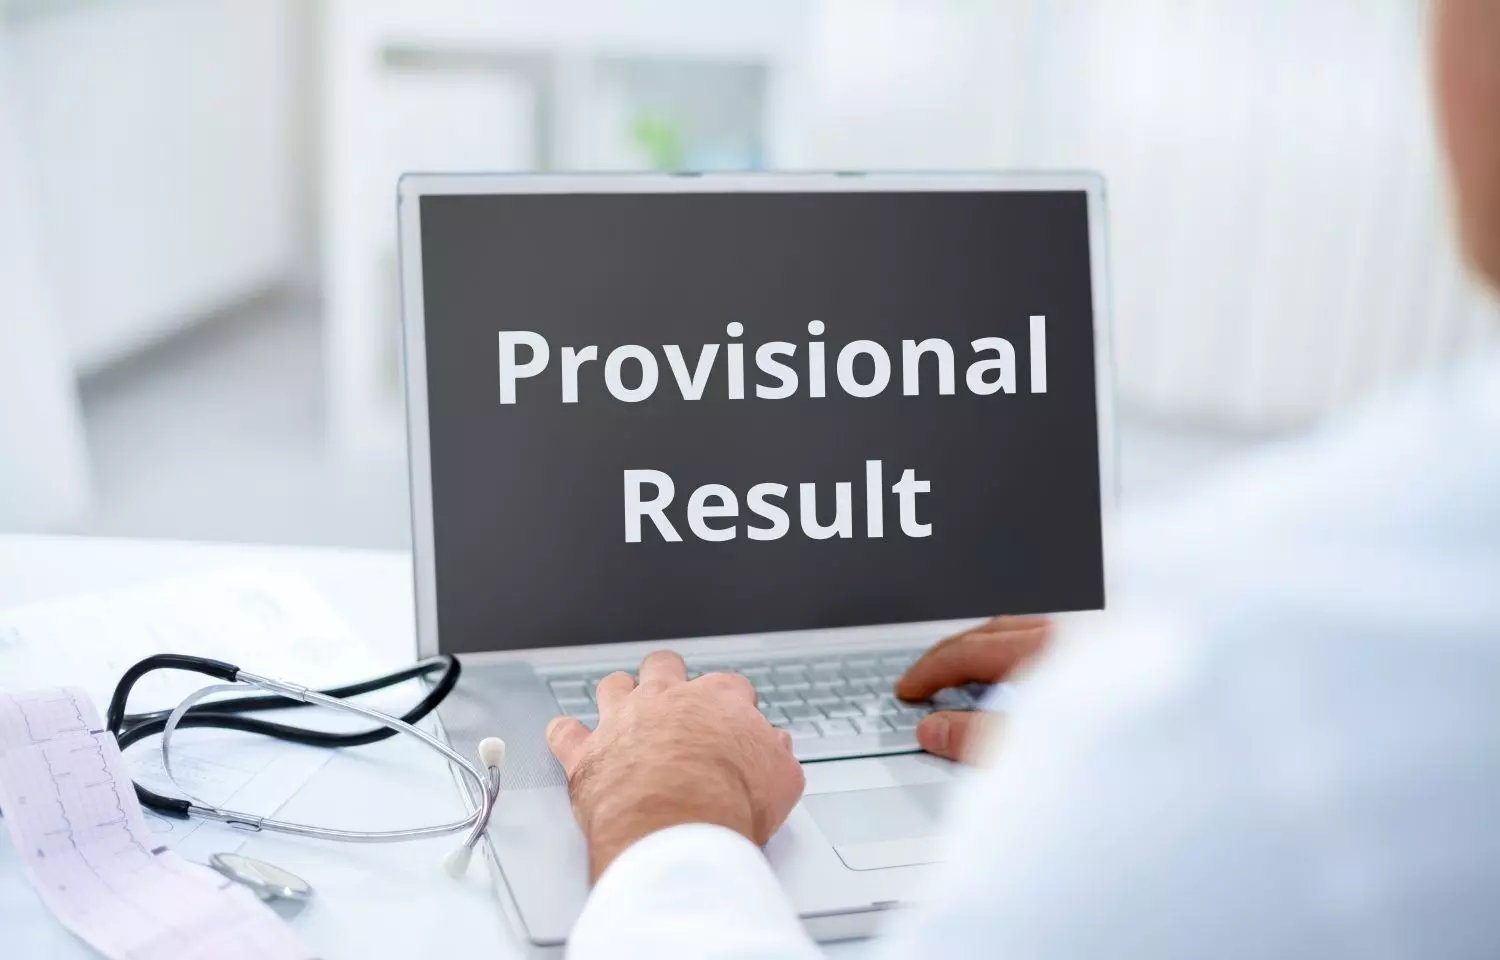 MCC Releases Provisional Result For Round 1 NEET Counselling 2022